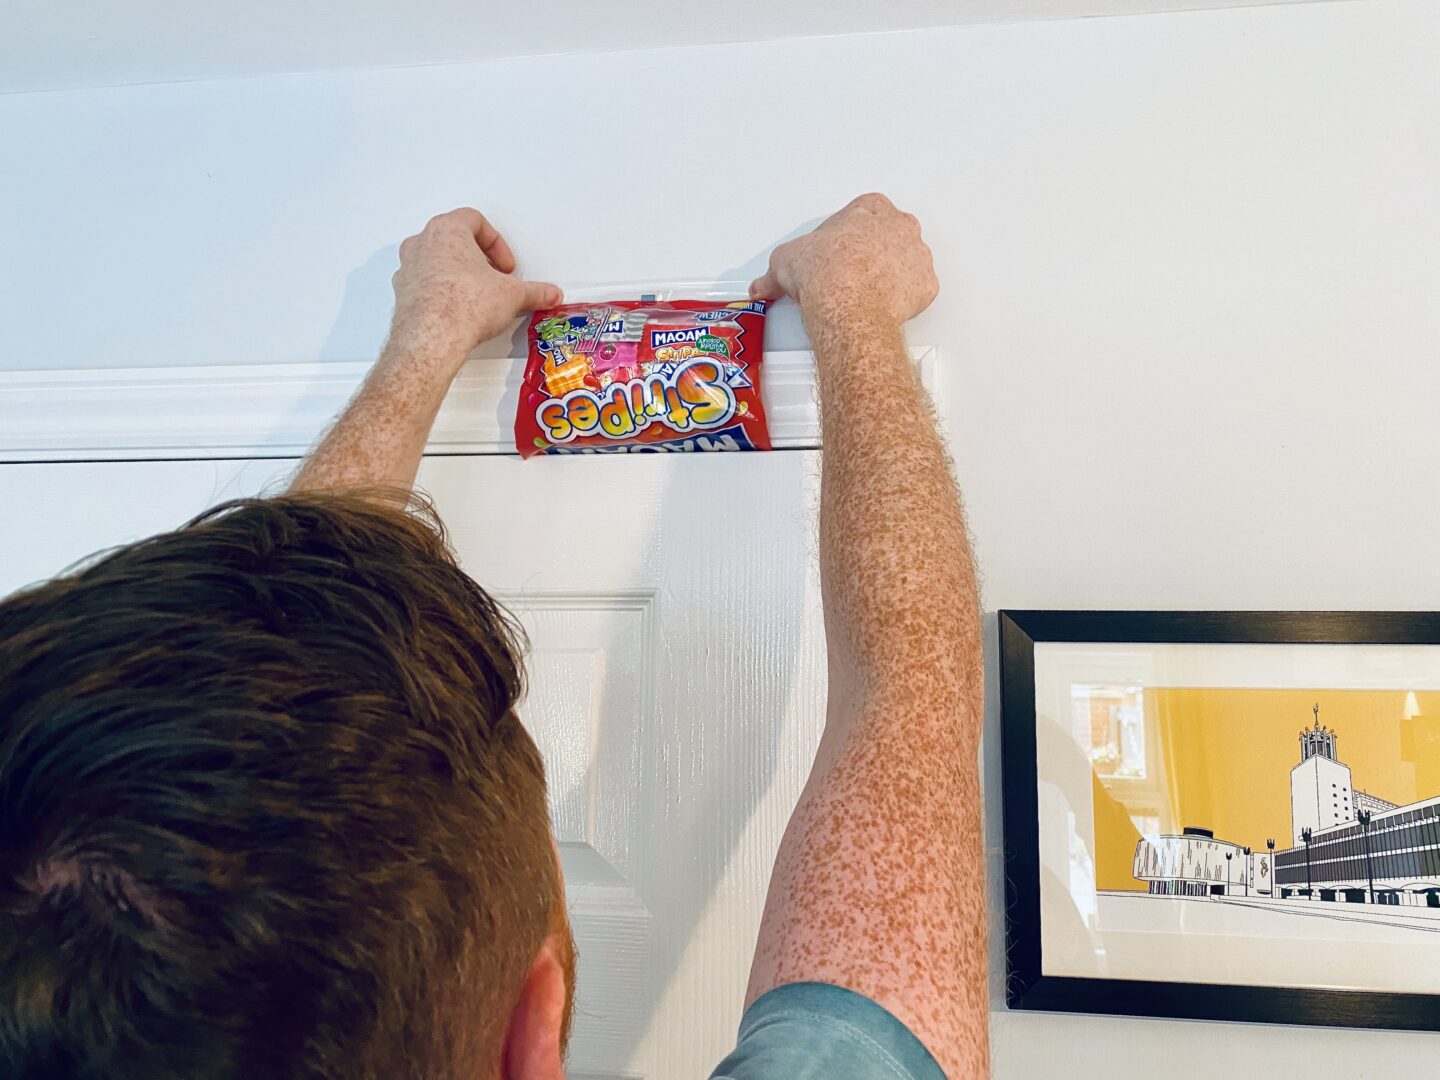 A man putting Maoam sweets into a door for a prank